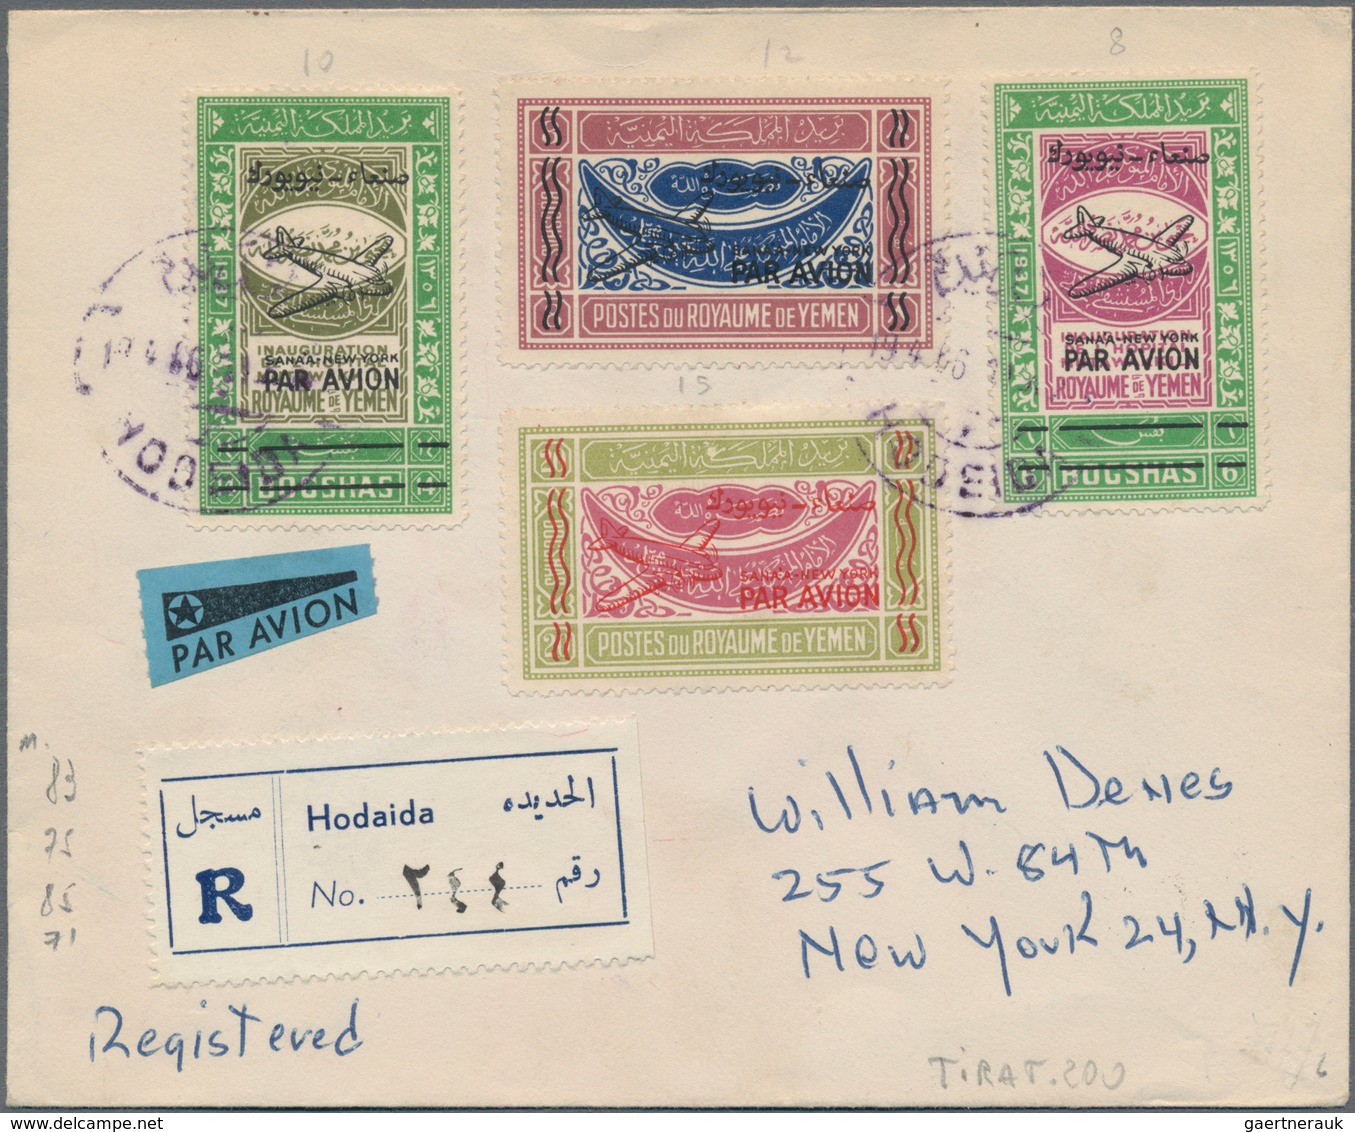 Jemen: 1947 Air Stamps 6b, 8b, 14b And 20b With Overprints For Prince's Flight From Sanaa, Used On R - Yemen